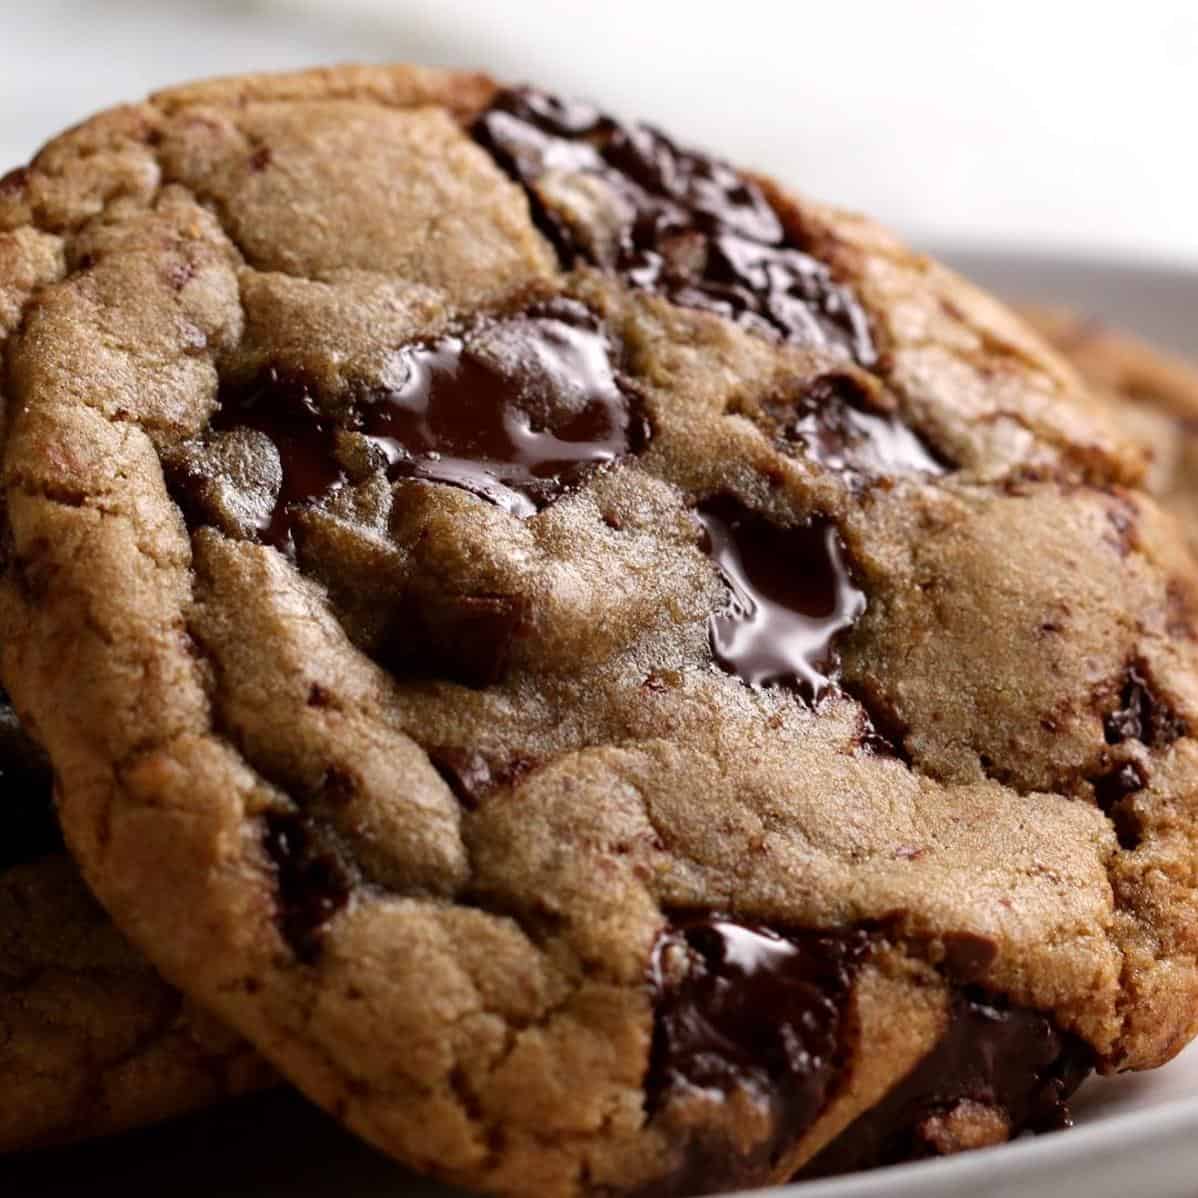 Indulge in Warm & Decadent Chocolate Chip Cookies Today!